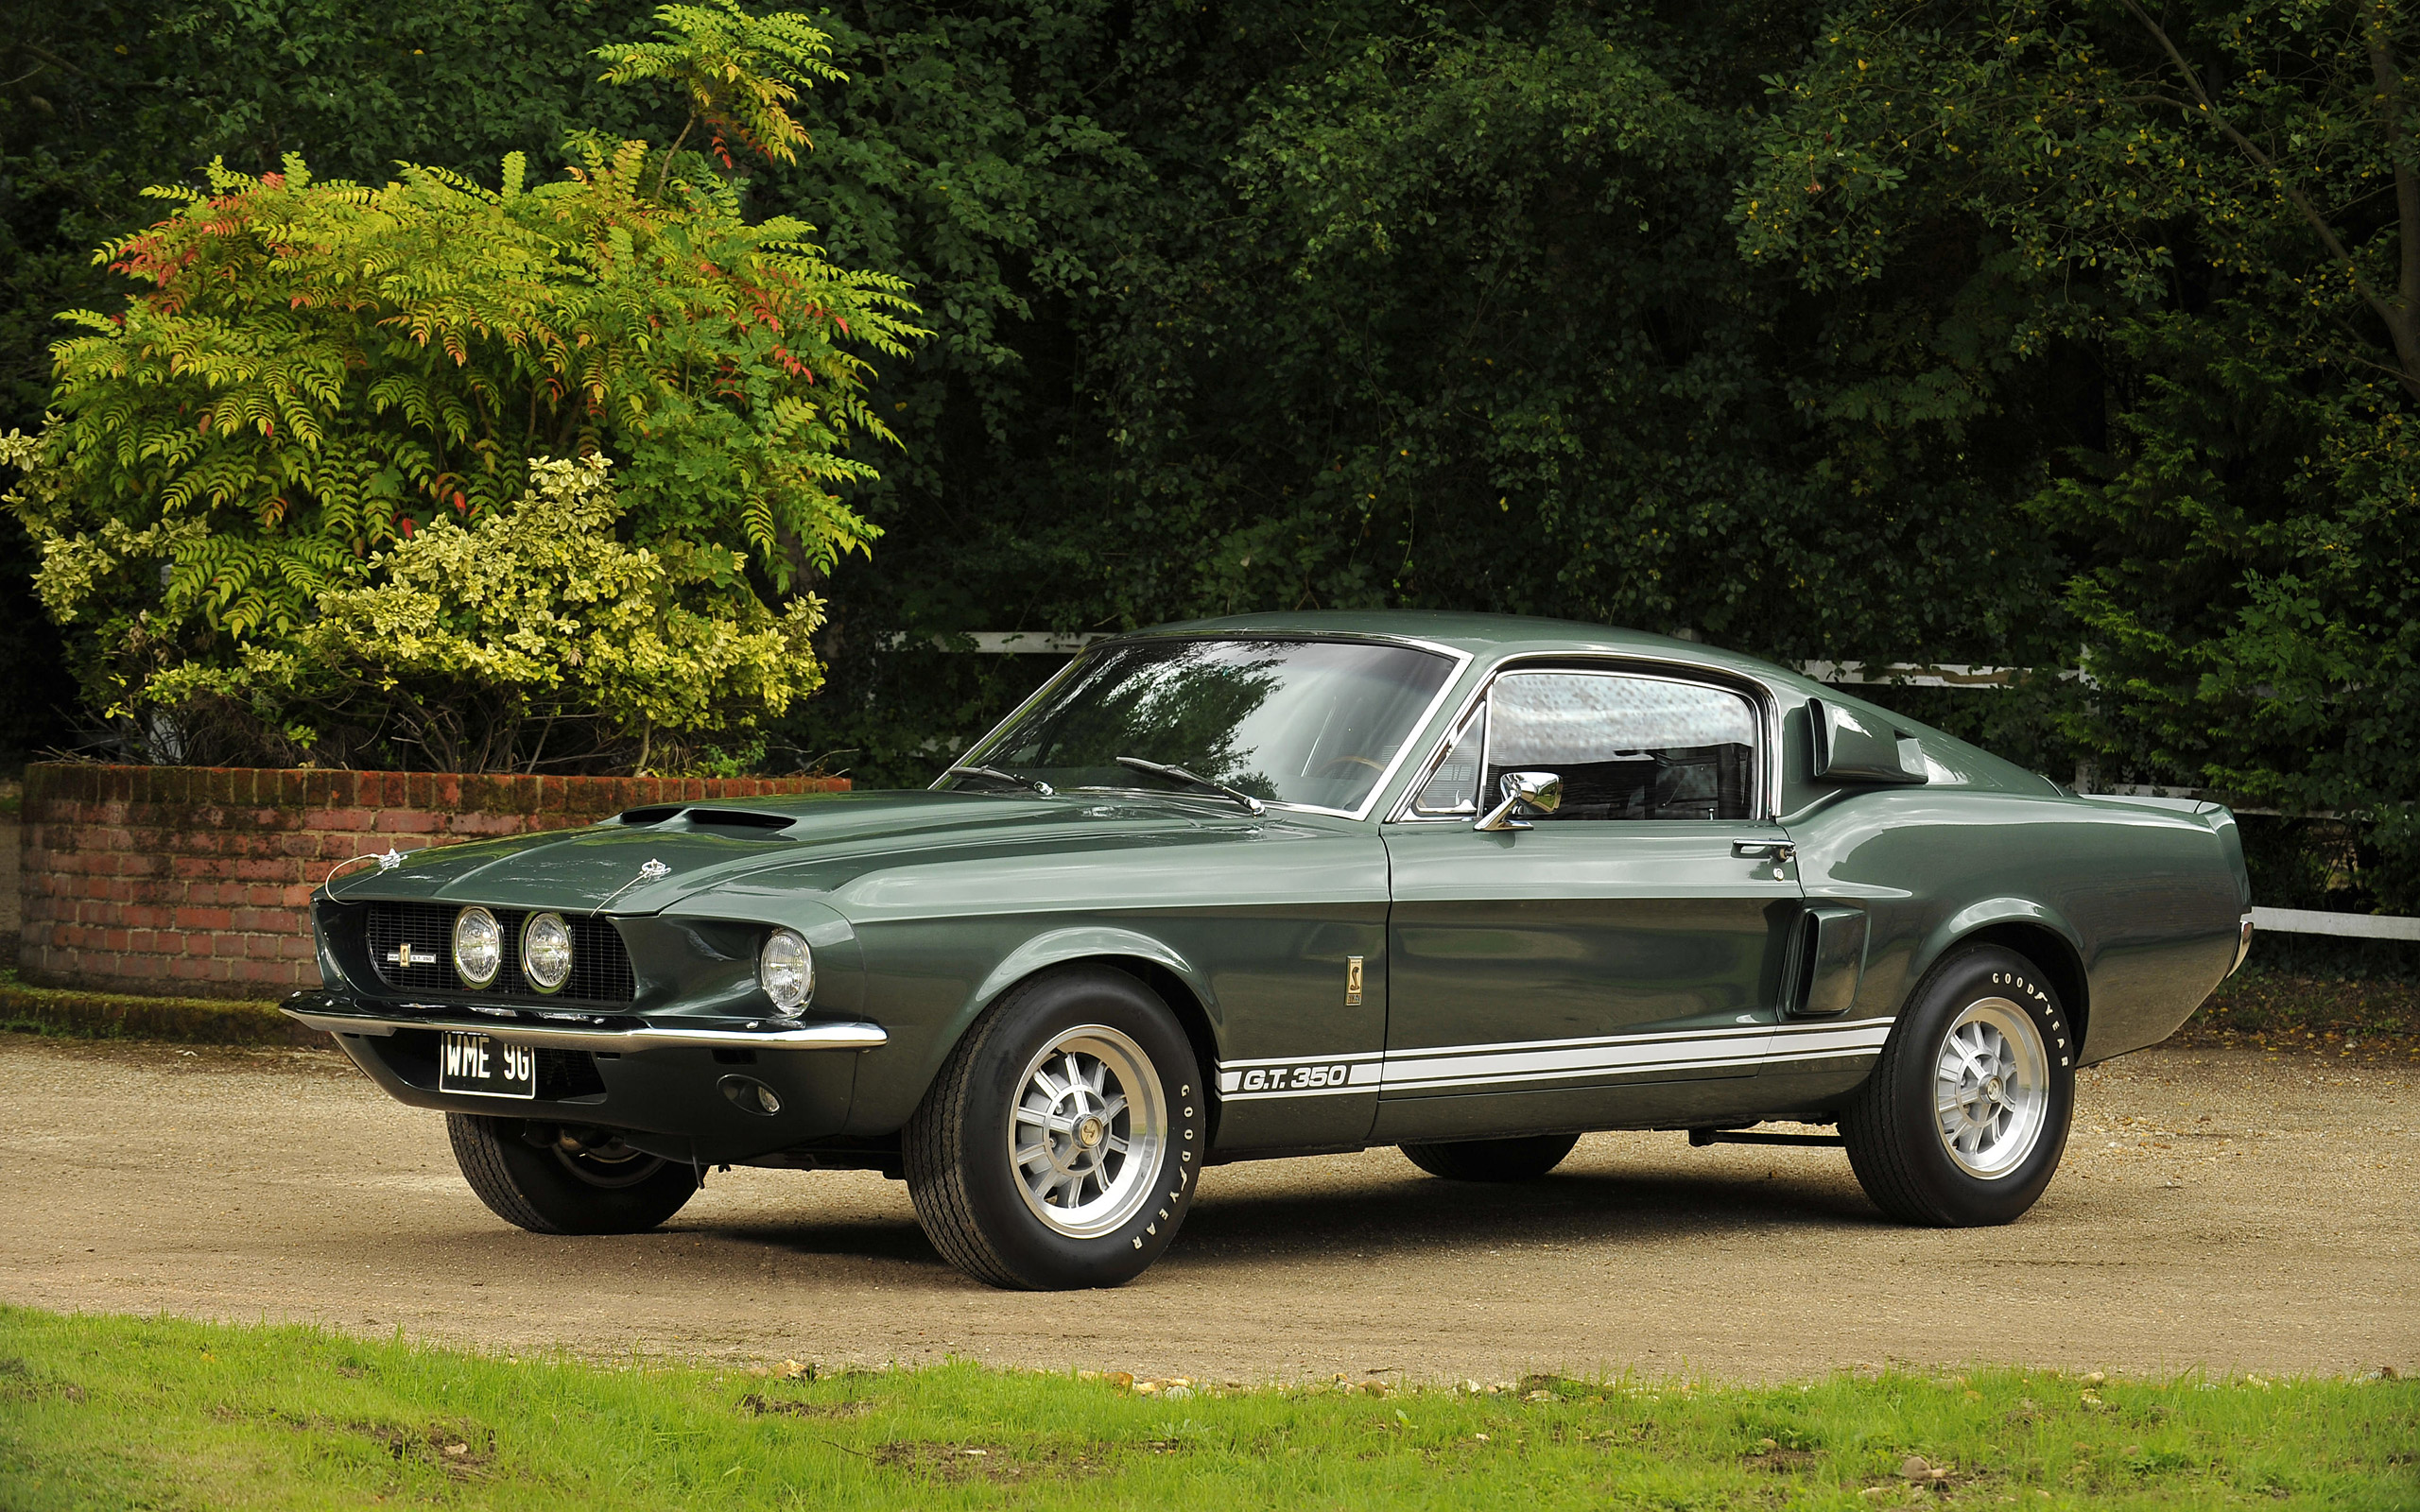 Mustang Of The Day: 1967 Shelby GT350